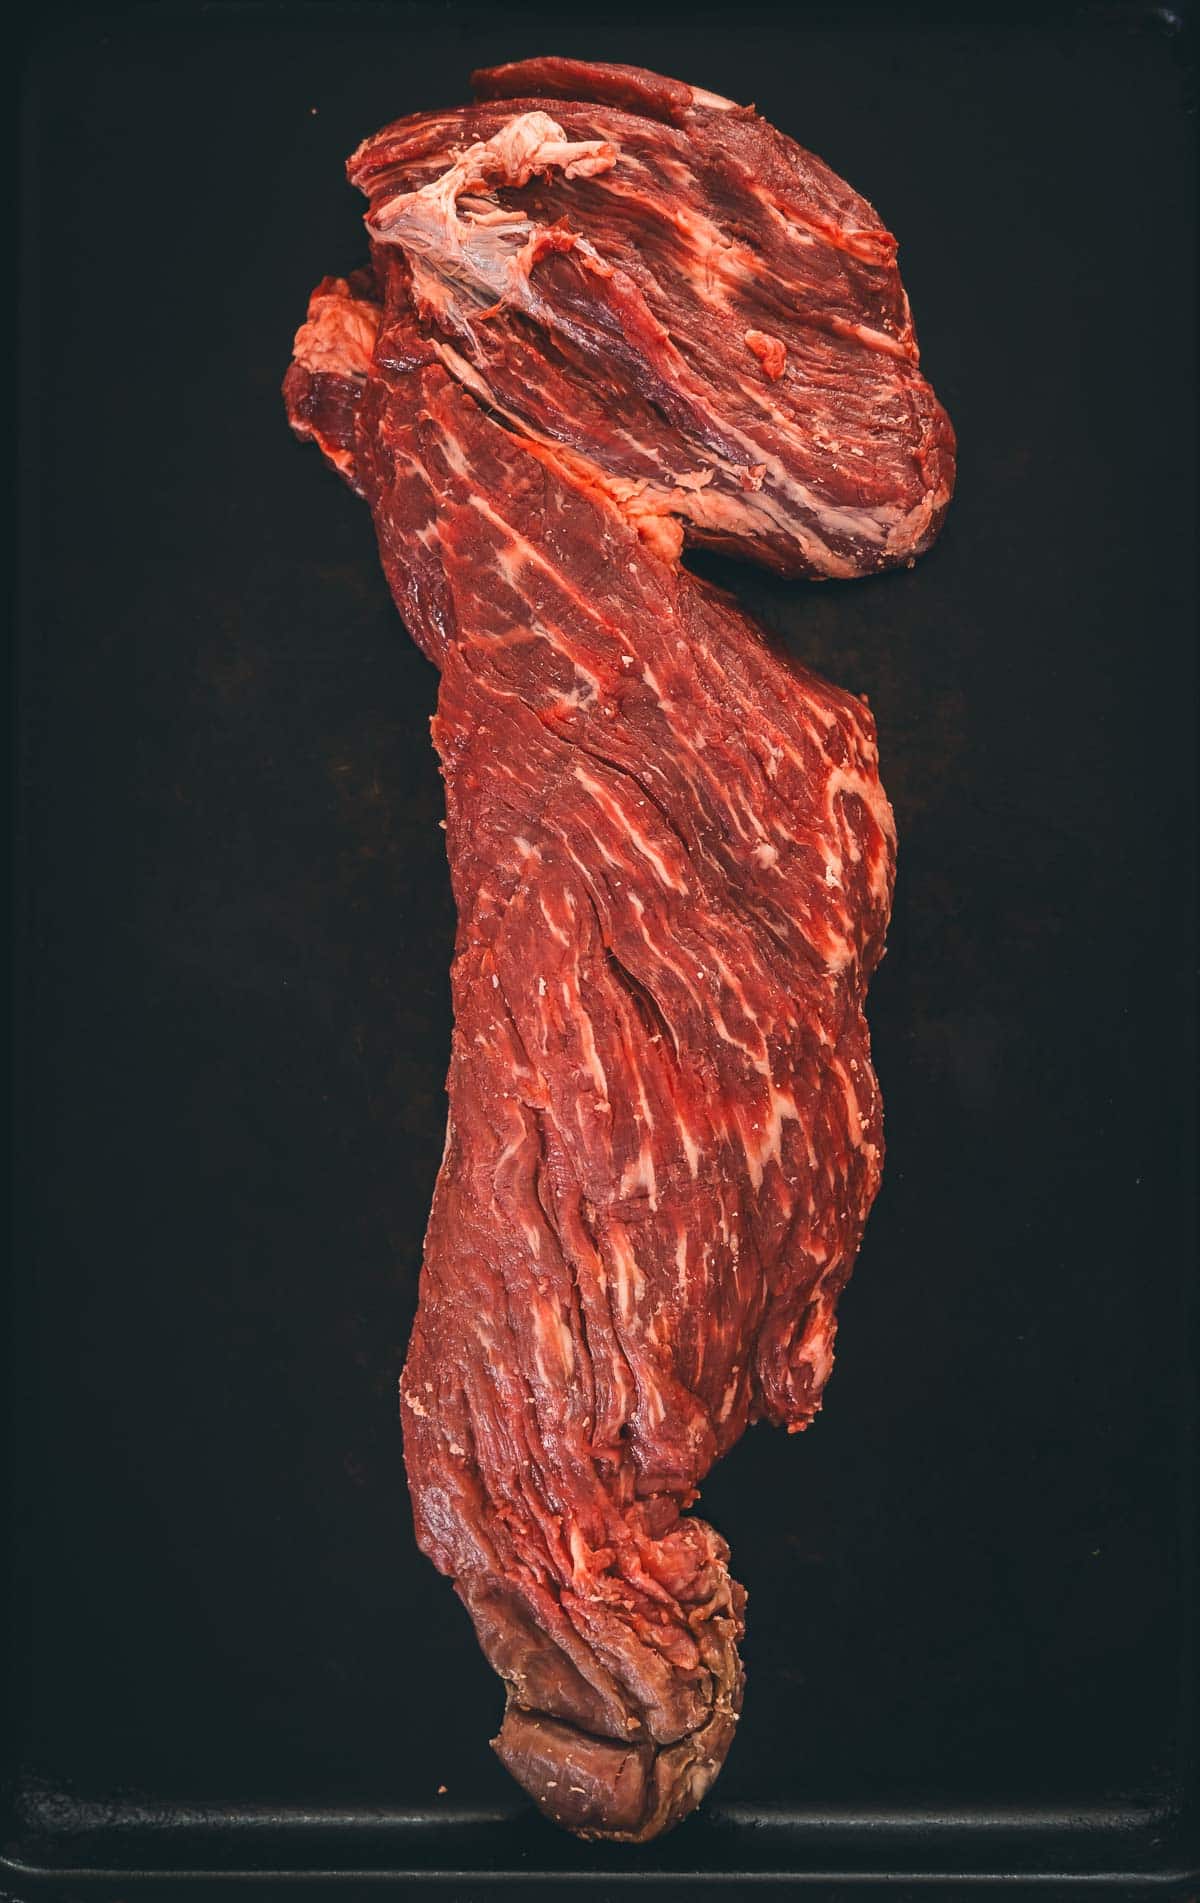 Whole beef tenderloin, that hasn't been tied to show the long head and tail end of the roast.